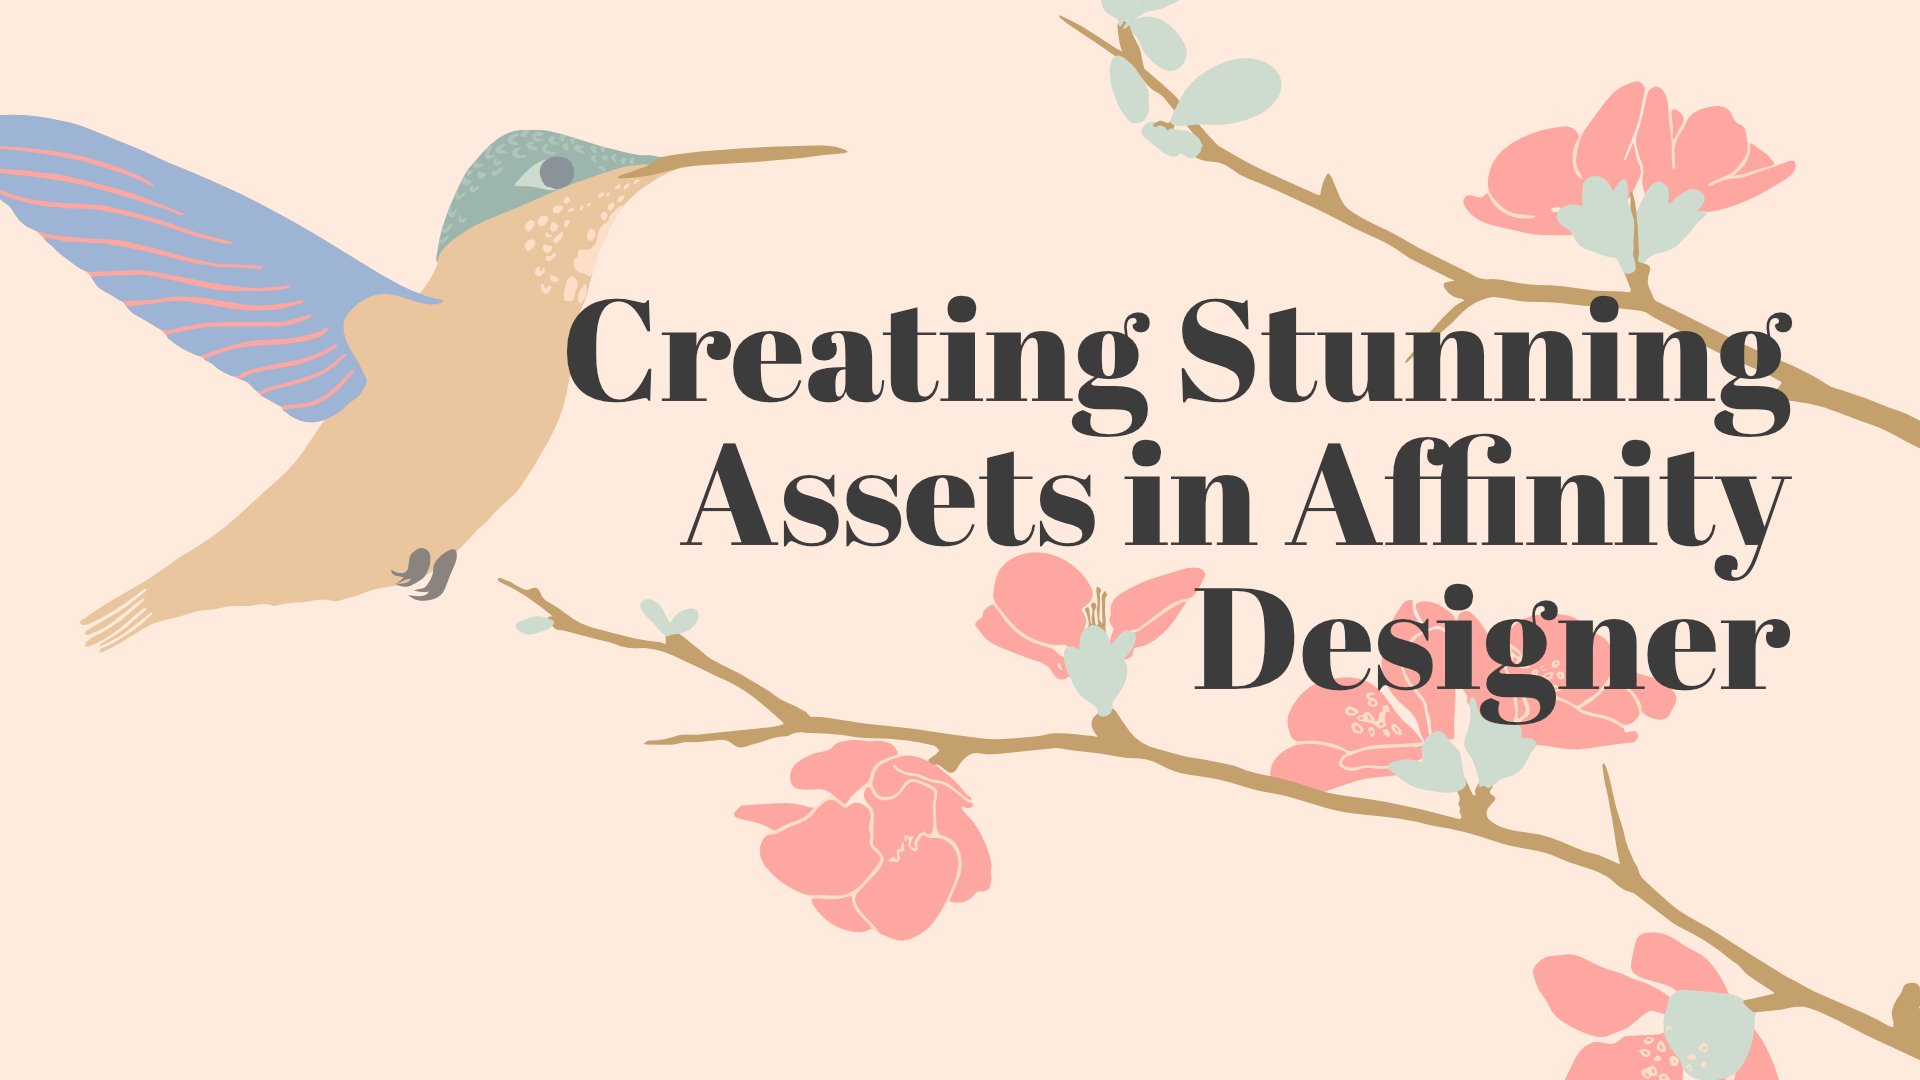 TITLE-PAGE_How-to-create-Assets_Affinity-Designer_The-Creative-Aerie_Perch-Handmade.jpg